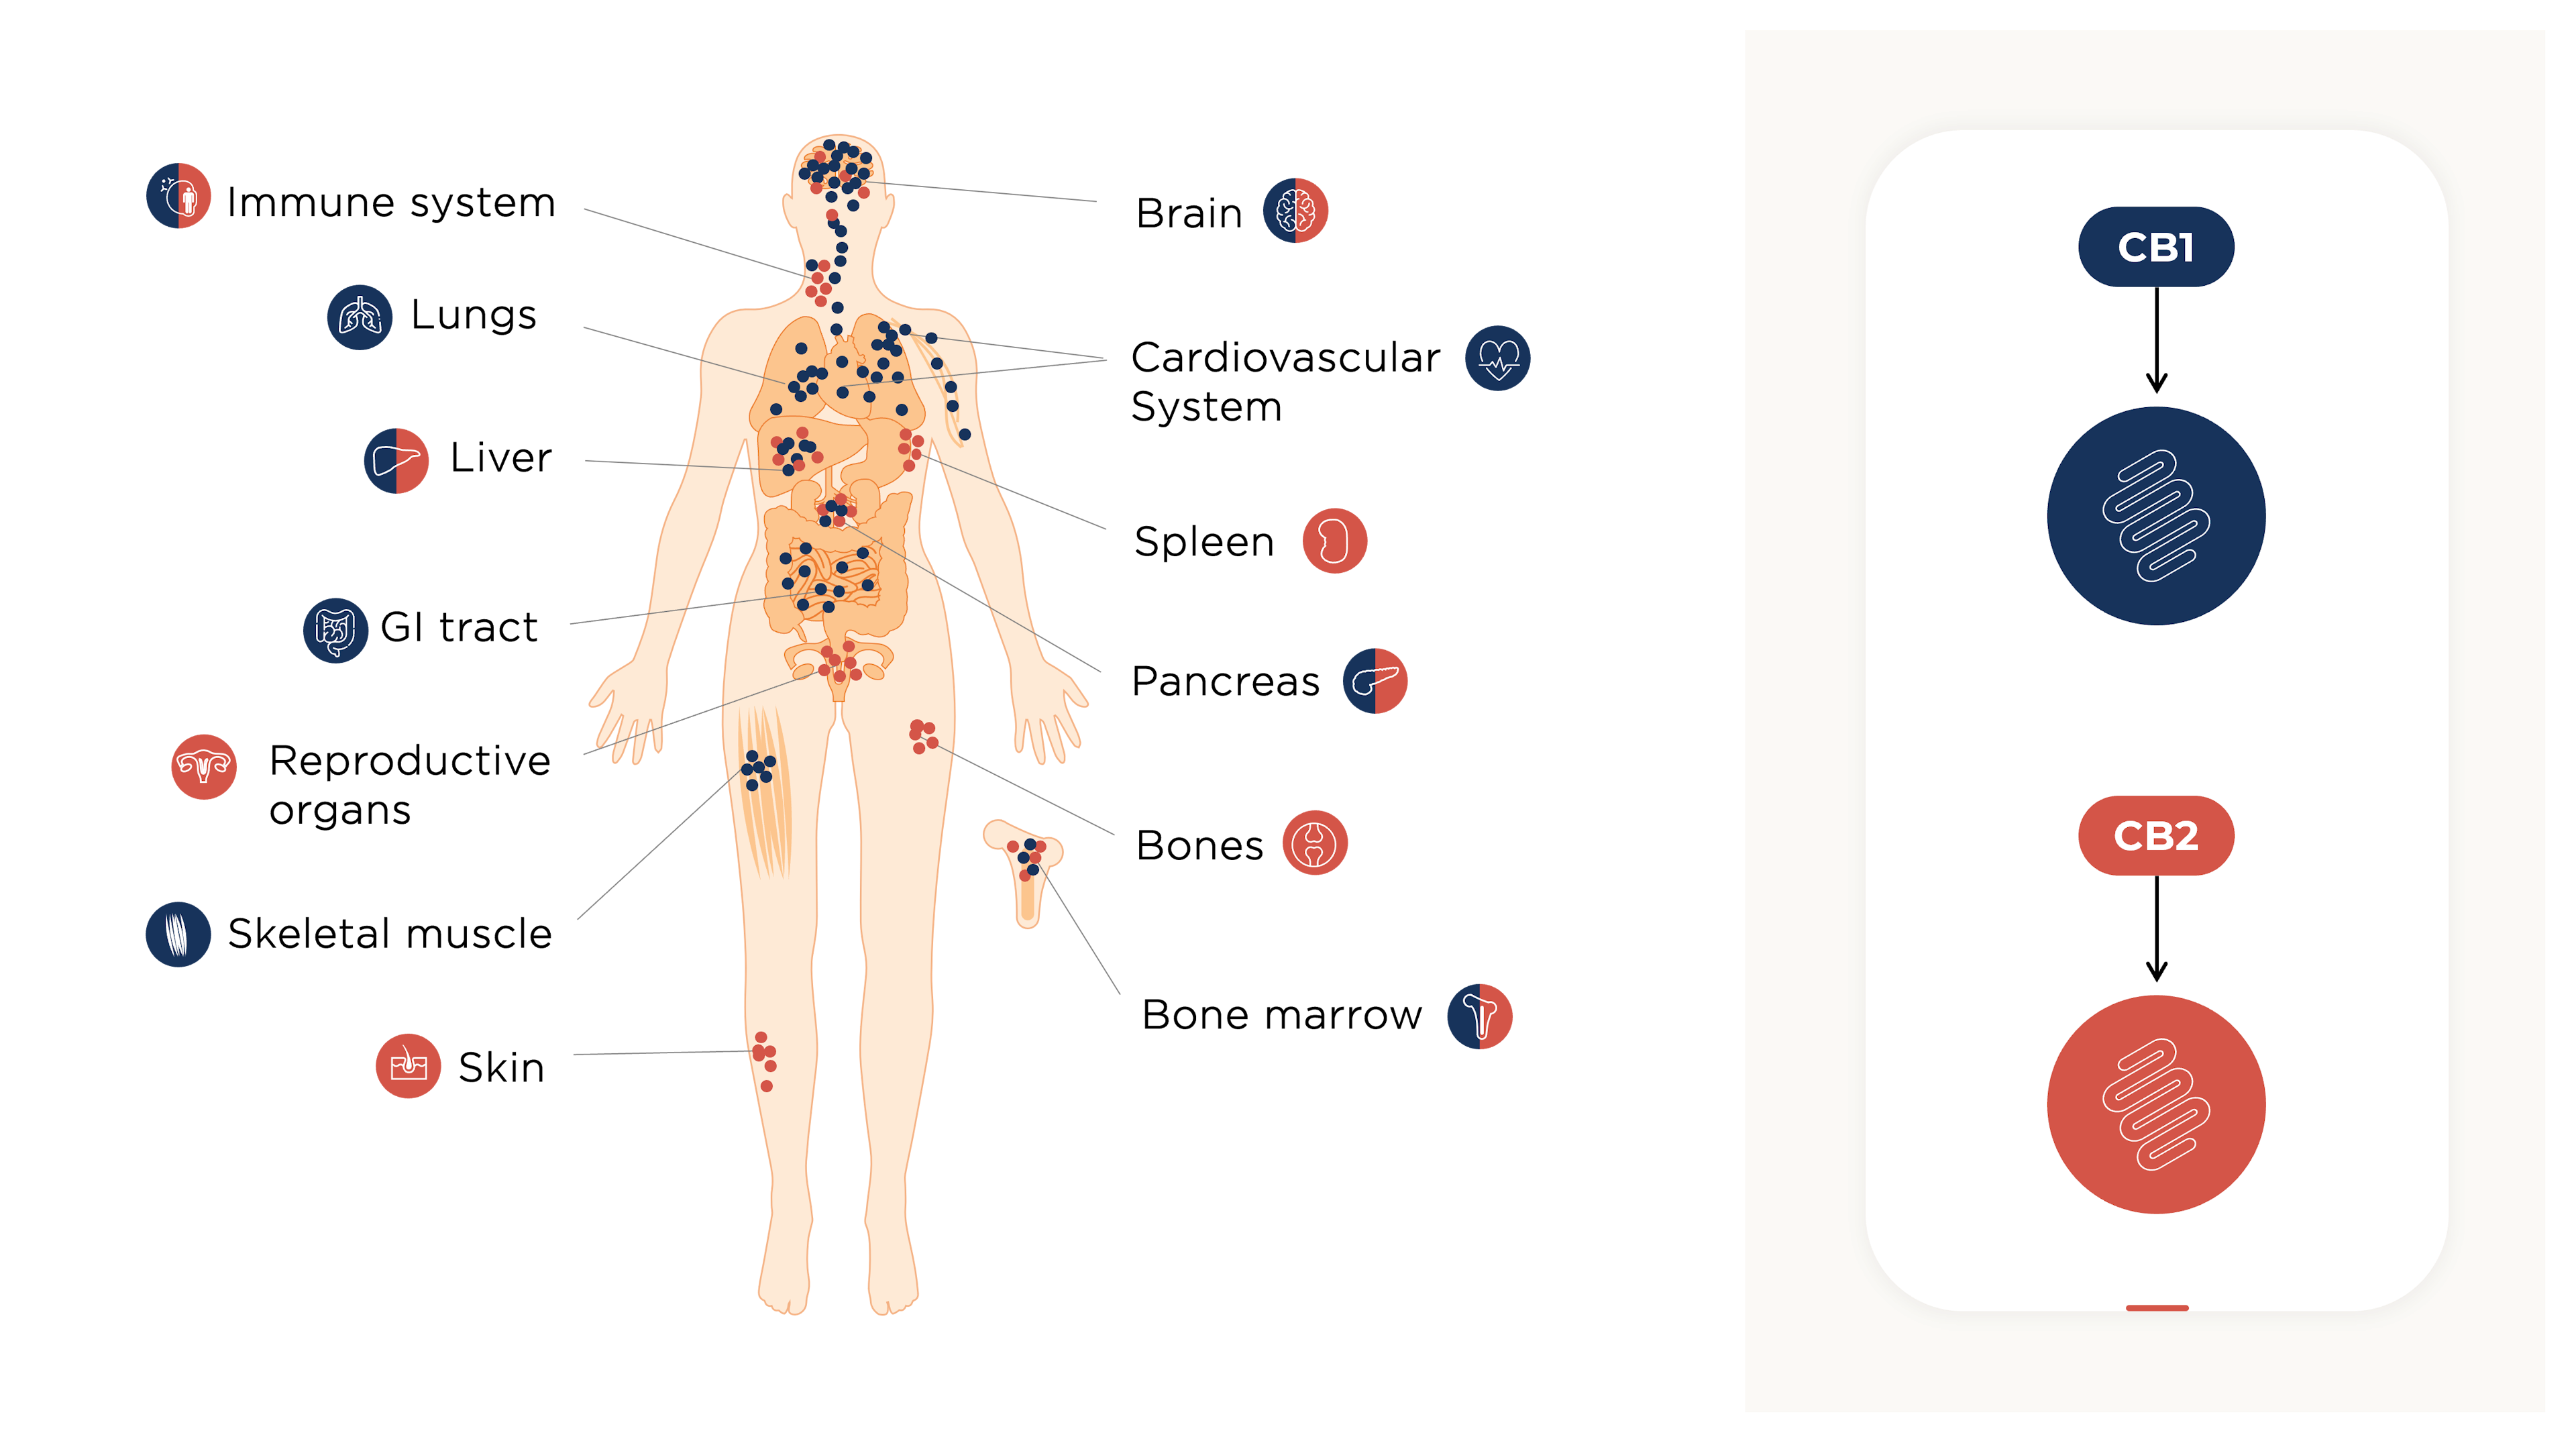 Distribution of endocannabinoid receptors (CB1 and CB2) in the body